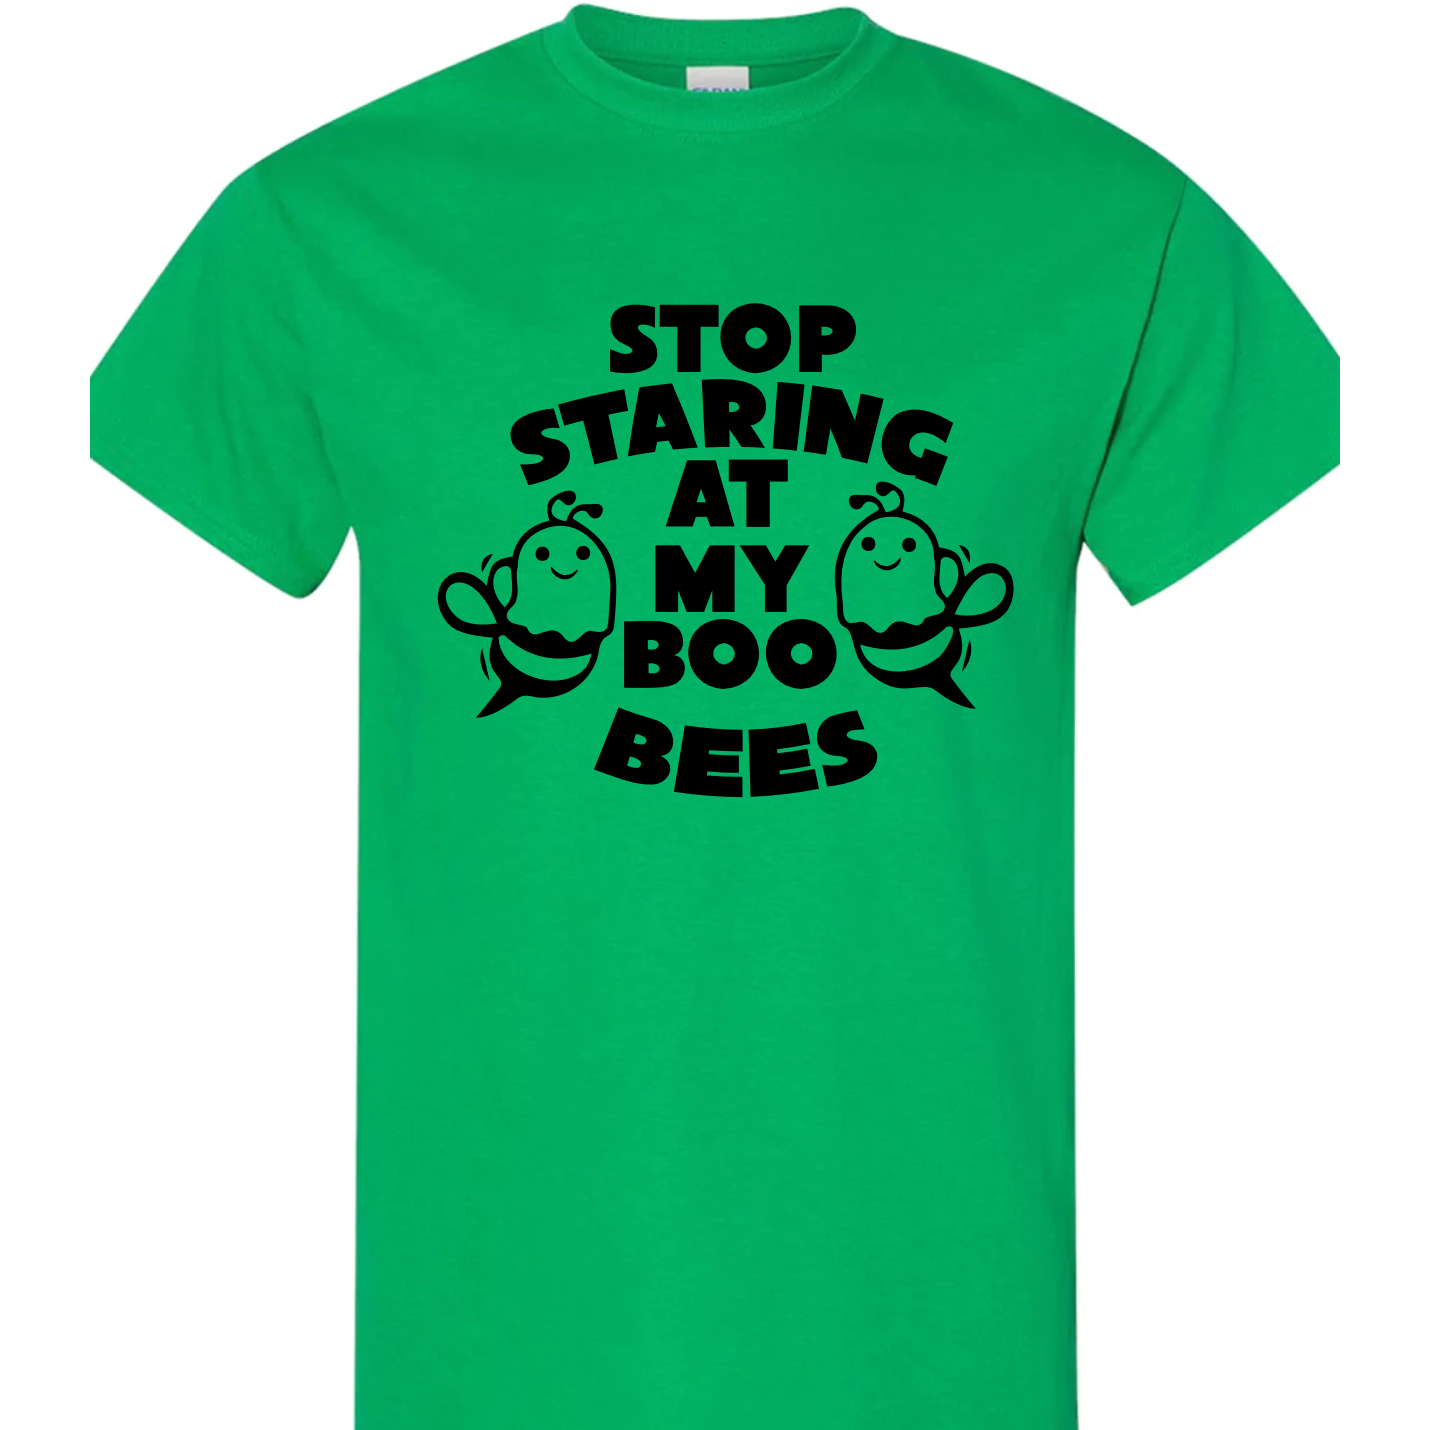 Stop Staring Vinyl Graphic for Shirts